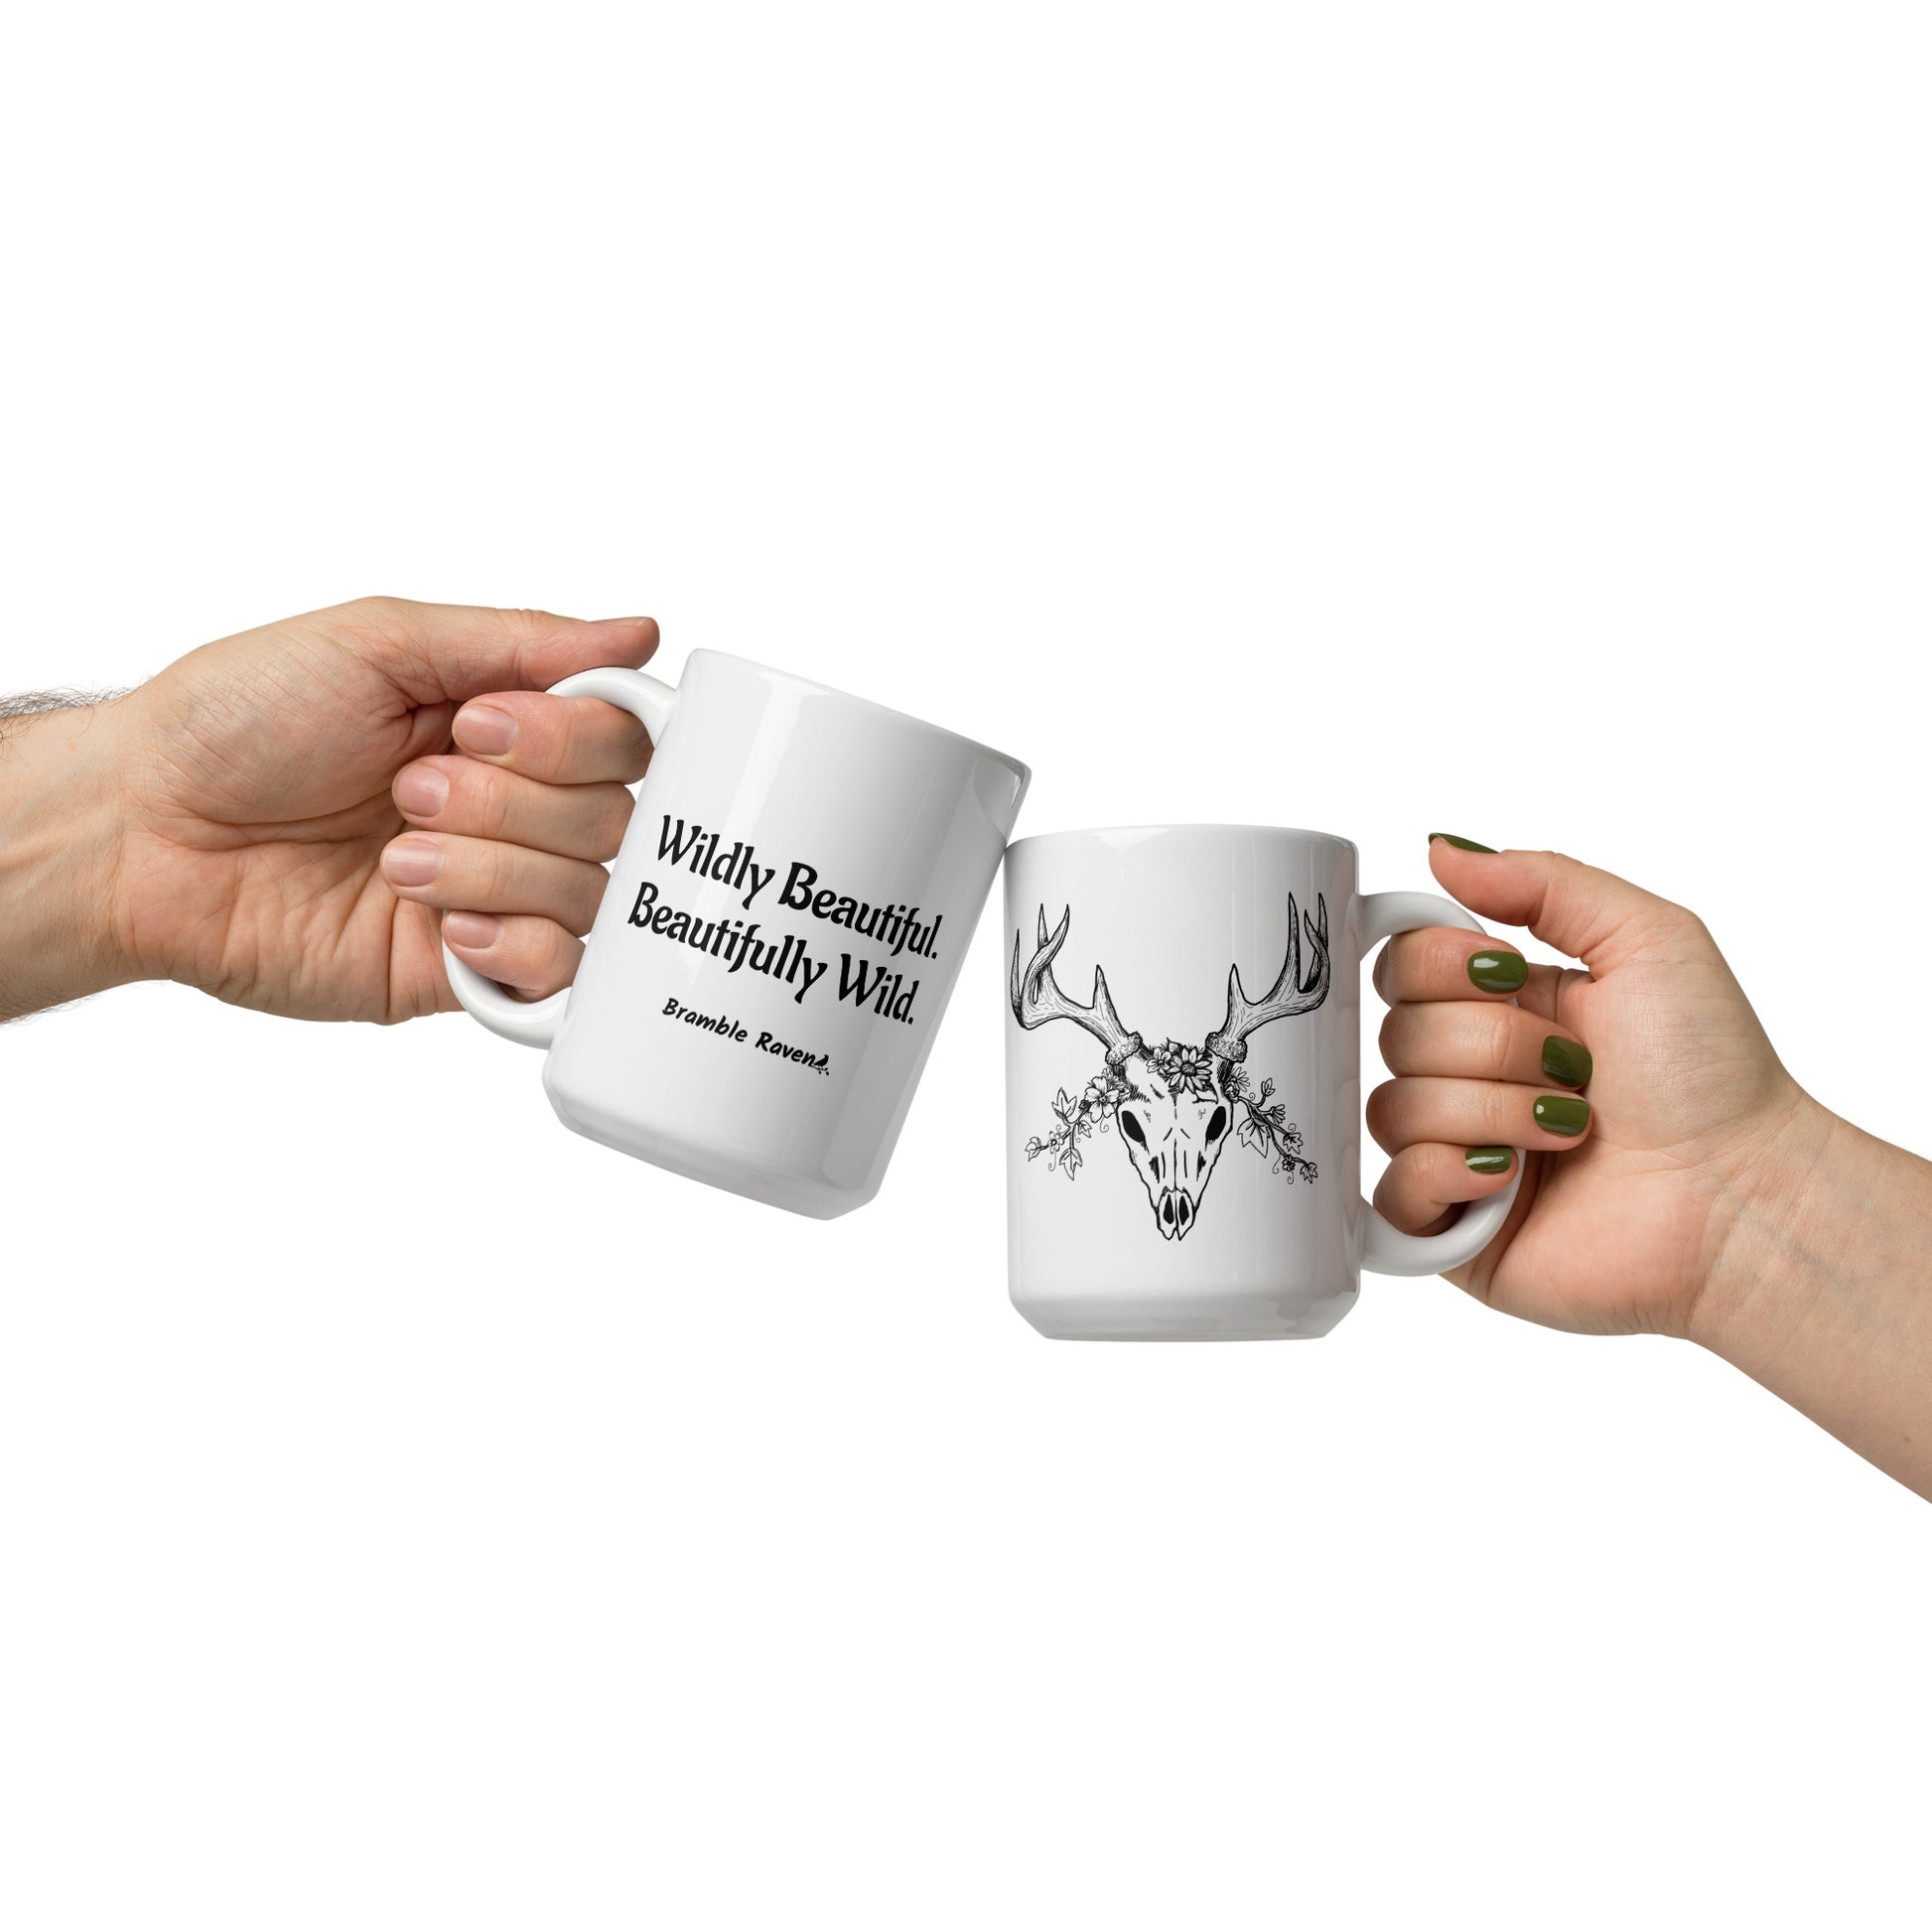 15 ounce white ceramic mug. Features hand-illustrated deer skull wreathed in flowers on one side, and text wildy beautiful, beautifully wild on the other side. Shown in models' hands.